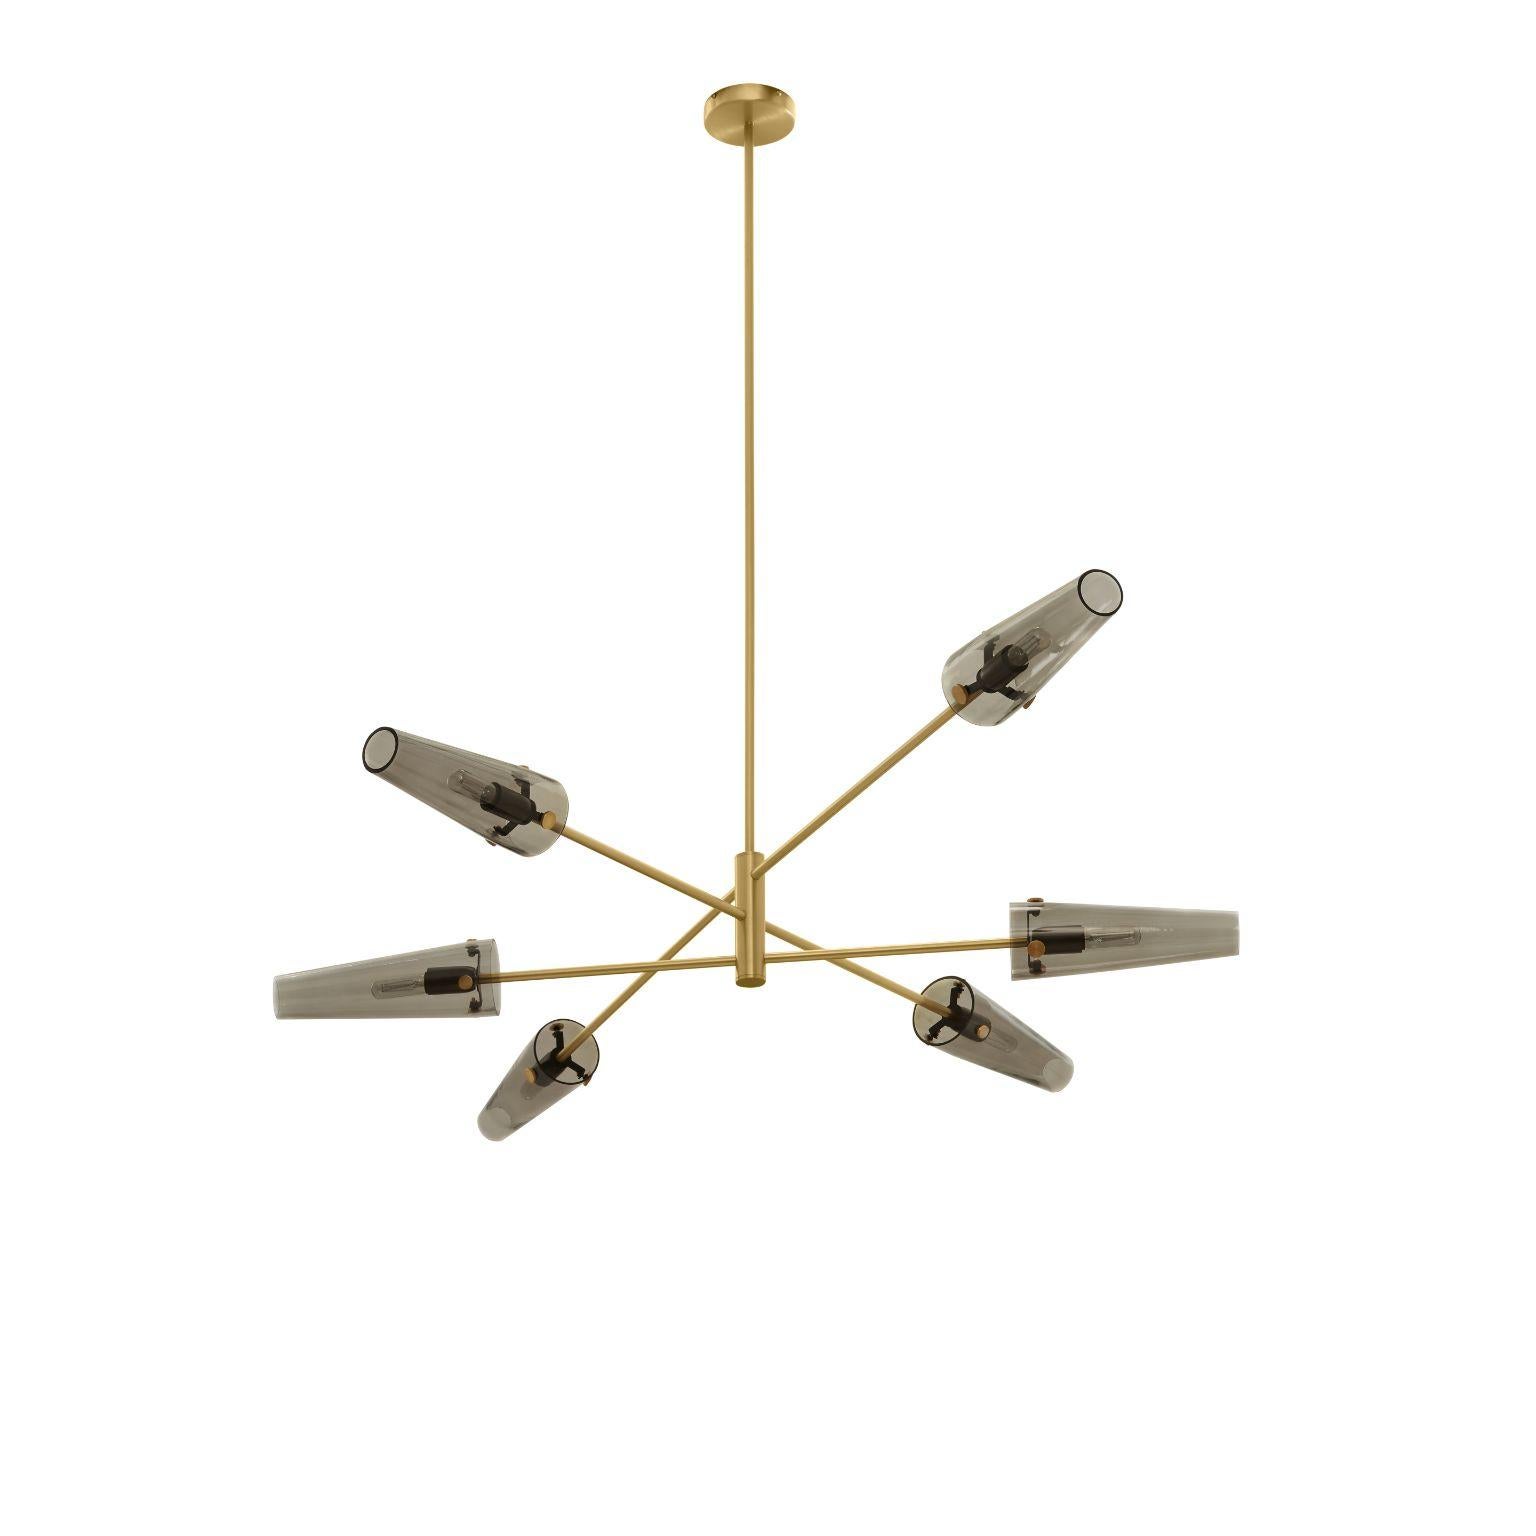 Axis six pendant lamp by CTO Lighting
Materials: Satin brass or dark bronze with smoked glass shades 
Dimensions: 172 x H min 24 cm

All our lamps can be wired according to each country. If sold to the USA it will be wired for the USA for